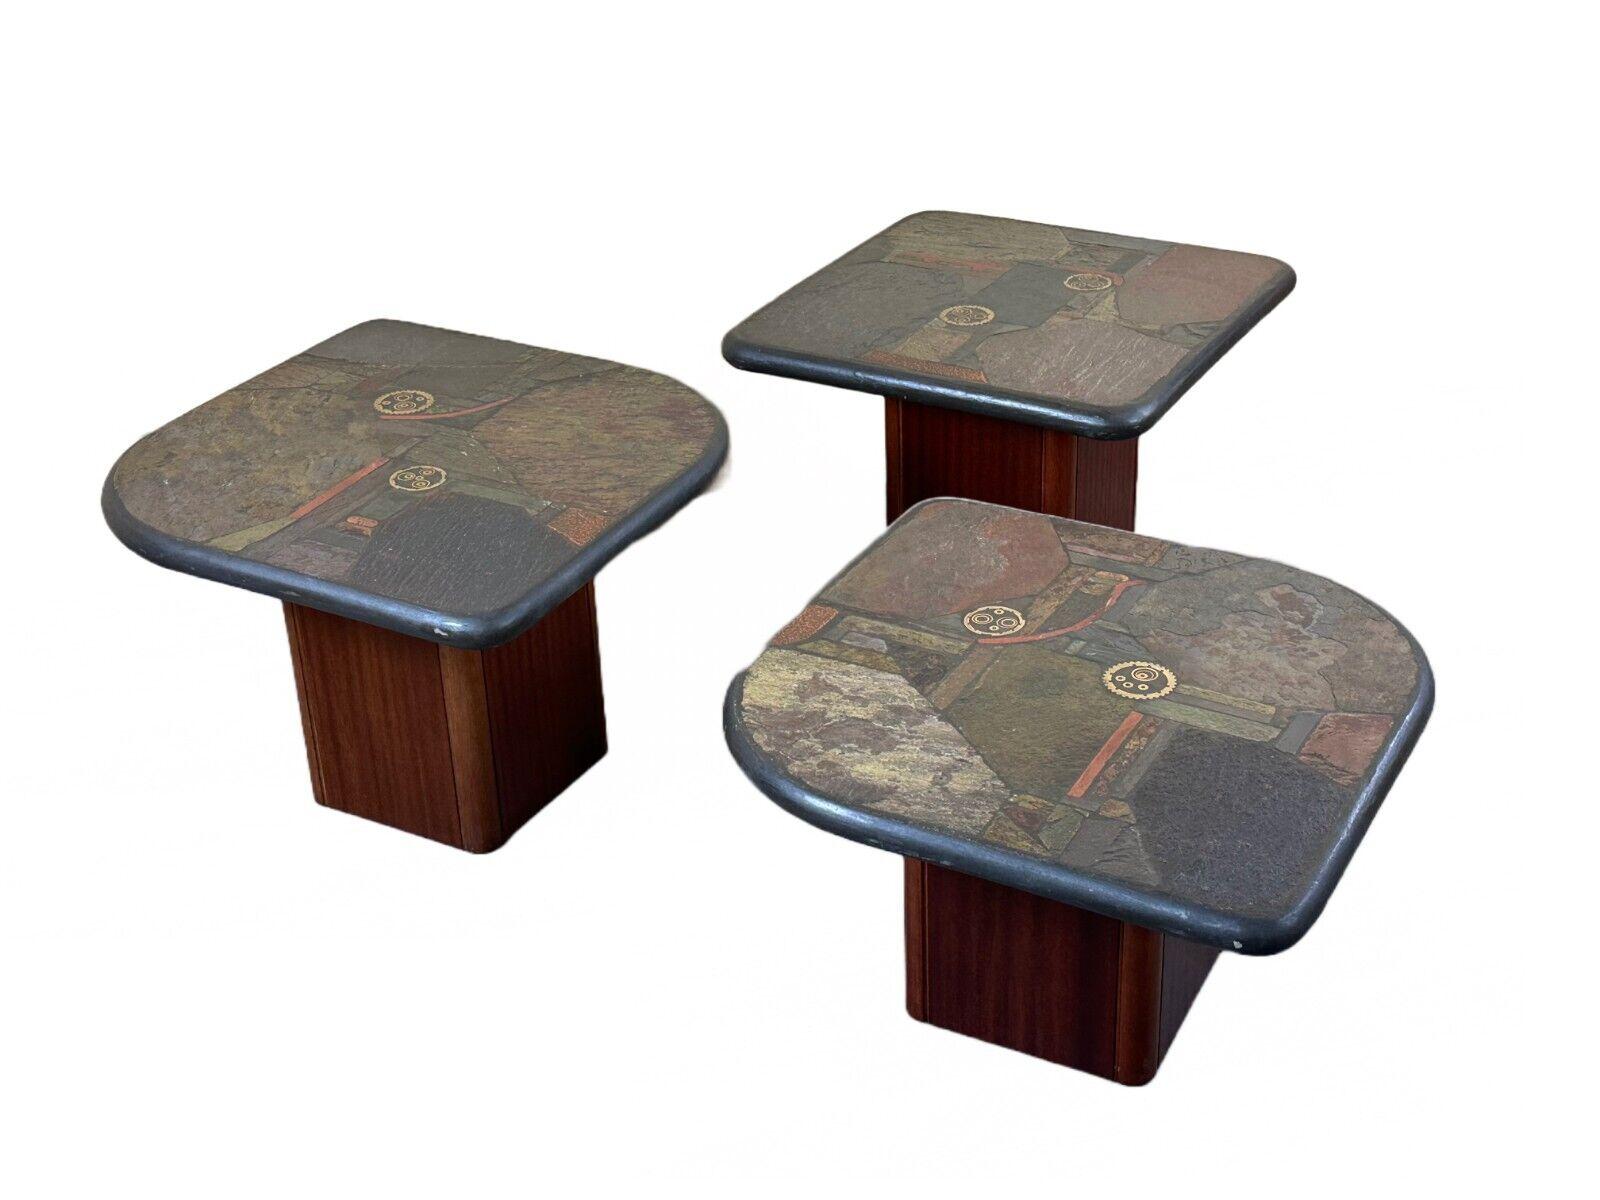 90s set of 3 brutal coffee tables with mosaic by Paul Kingma for Kneip

Object: Set of 3 coffee tables

Manufacturer: Kneip, Germany

Condition: good - vintage

Age: around 1990

Dimensions:

Width = 64.5cm
Depth = 64.5cm
Height =